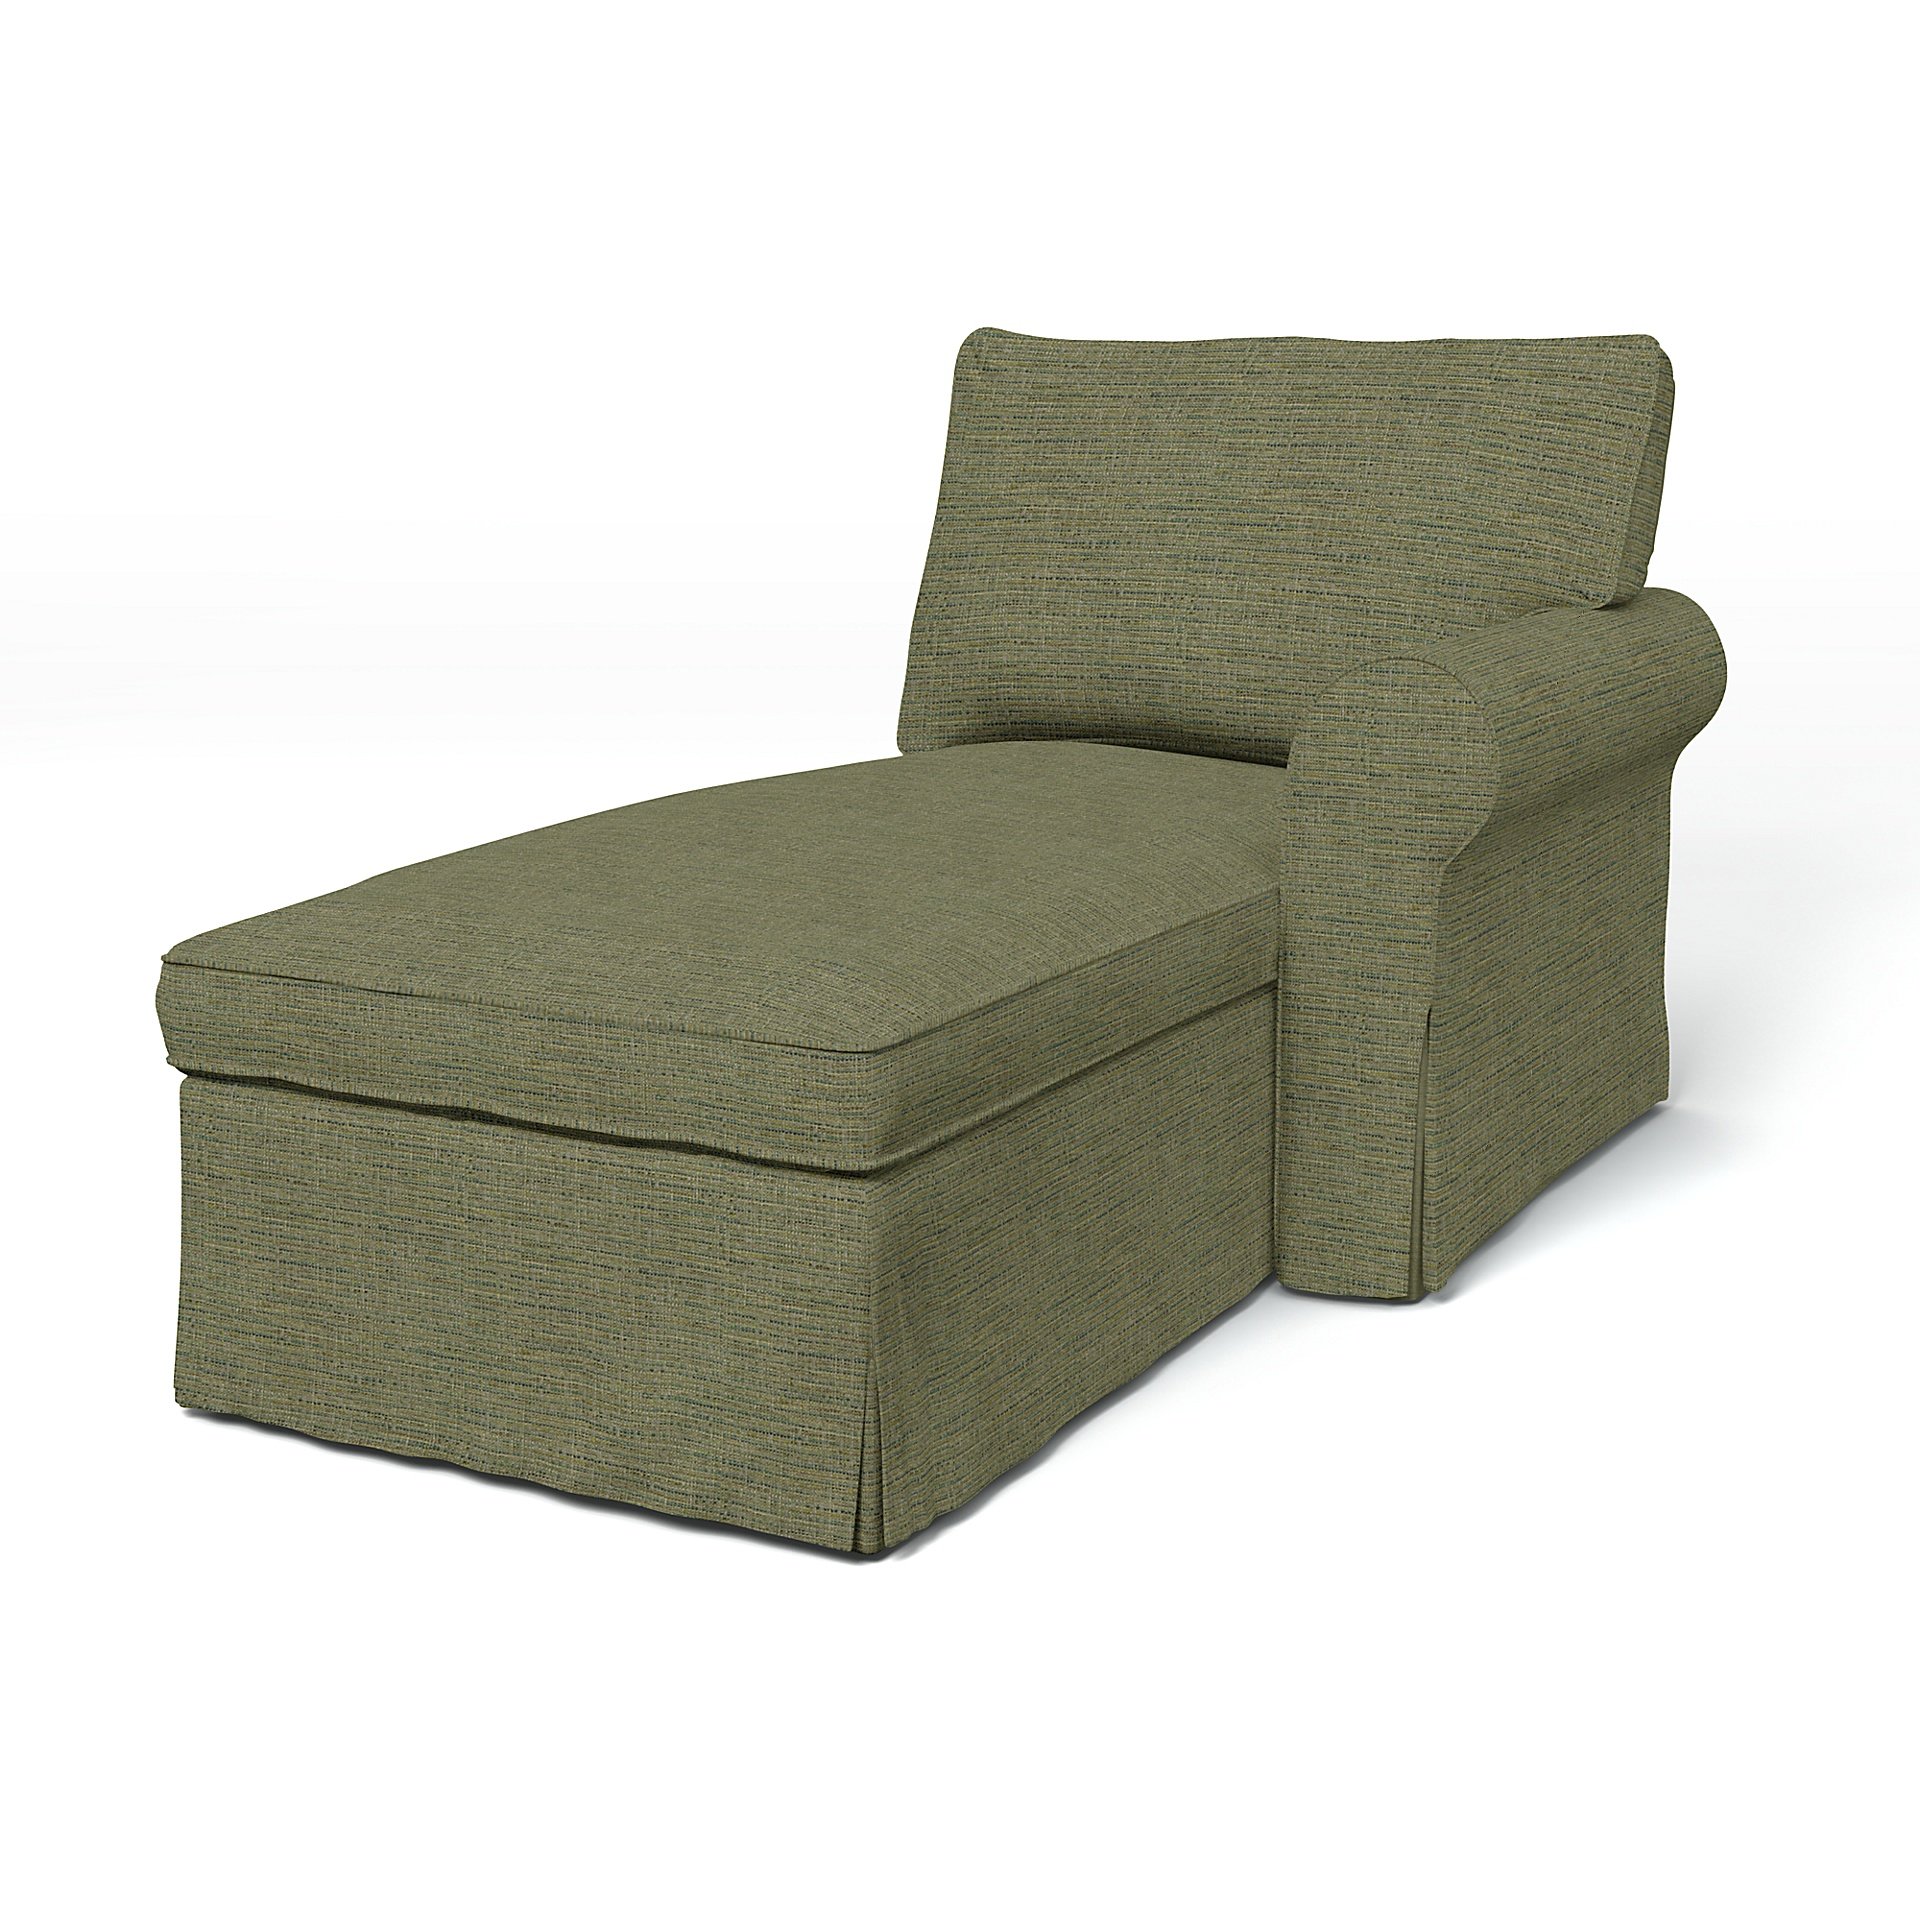 IKEA - Ektorp Chaise with Right Armrest Cover, Meadow Green, Boucle & Texture - Bemz